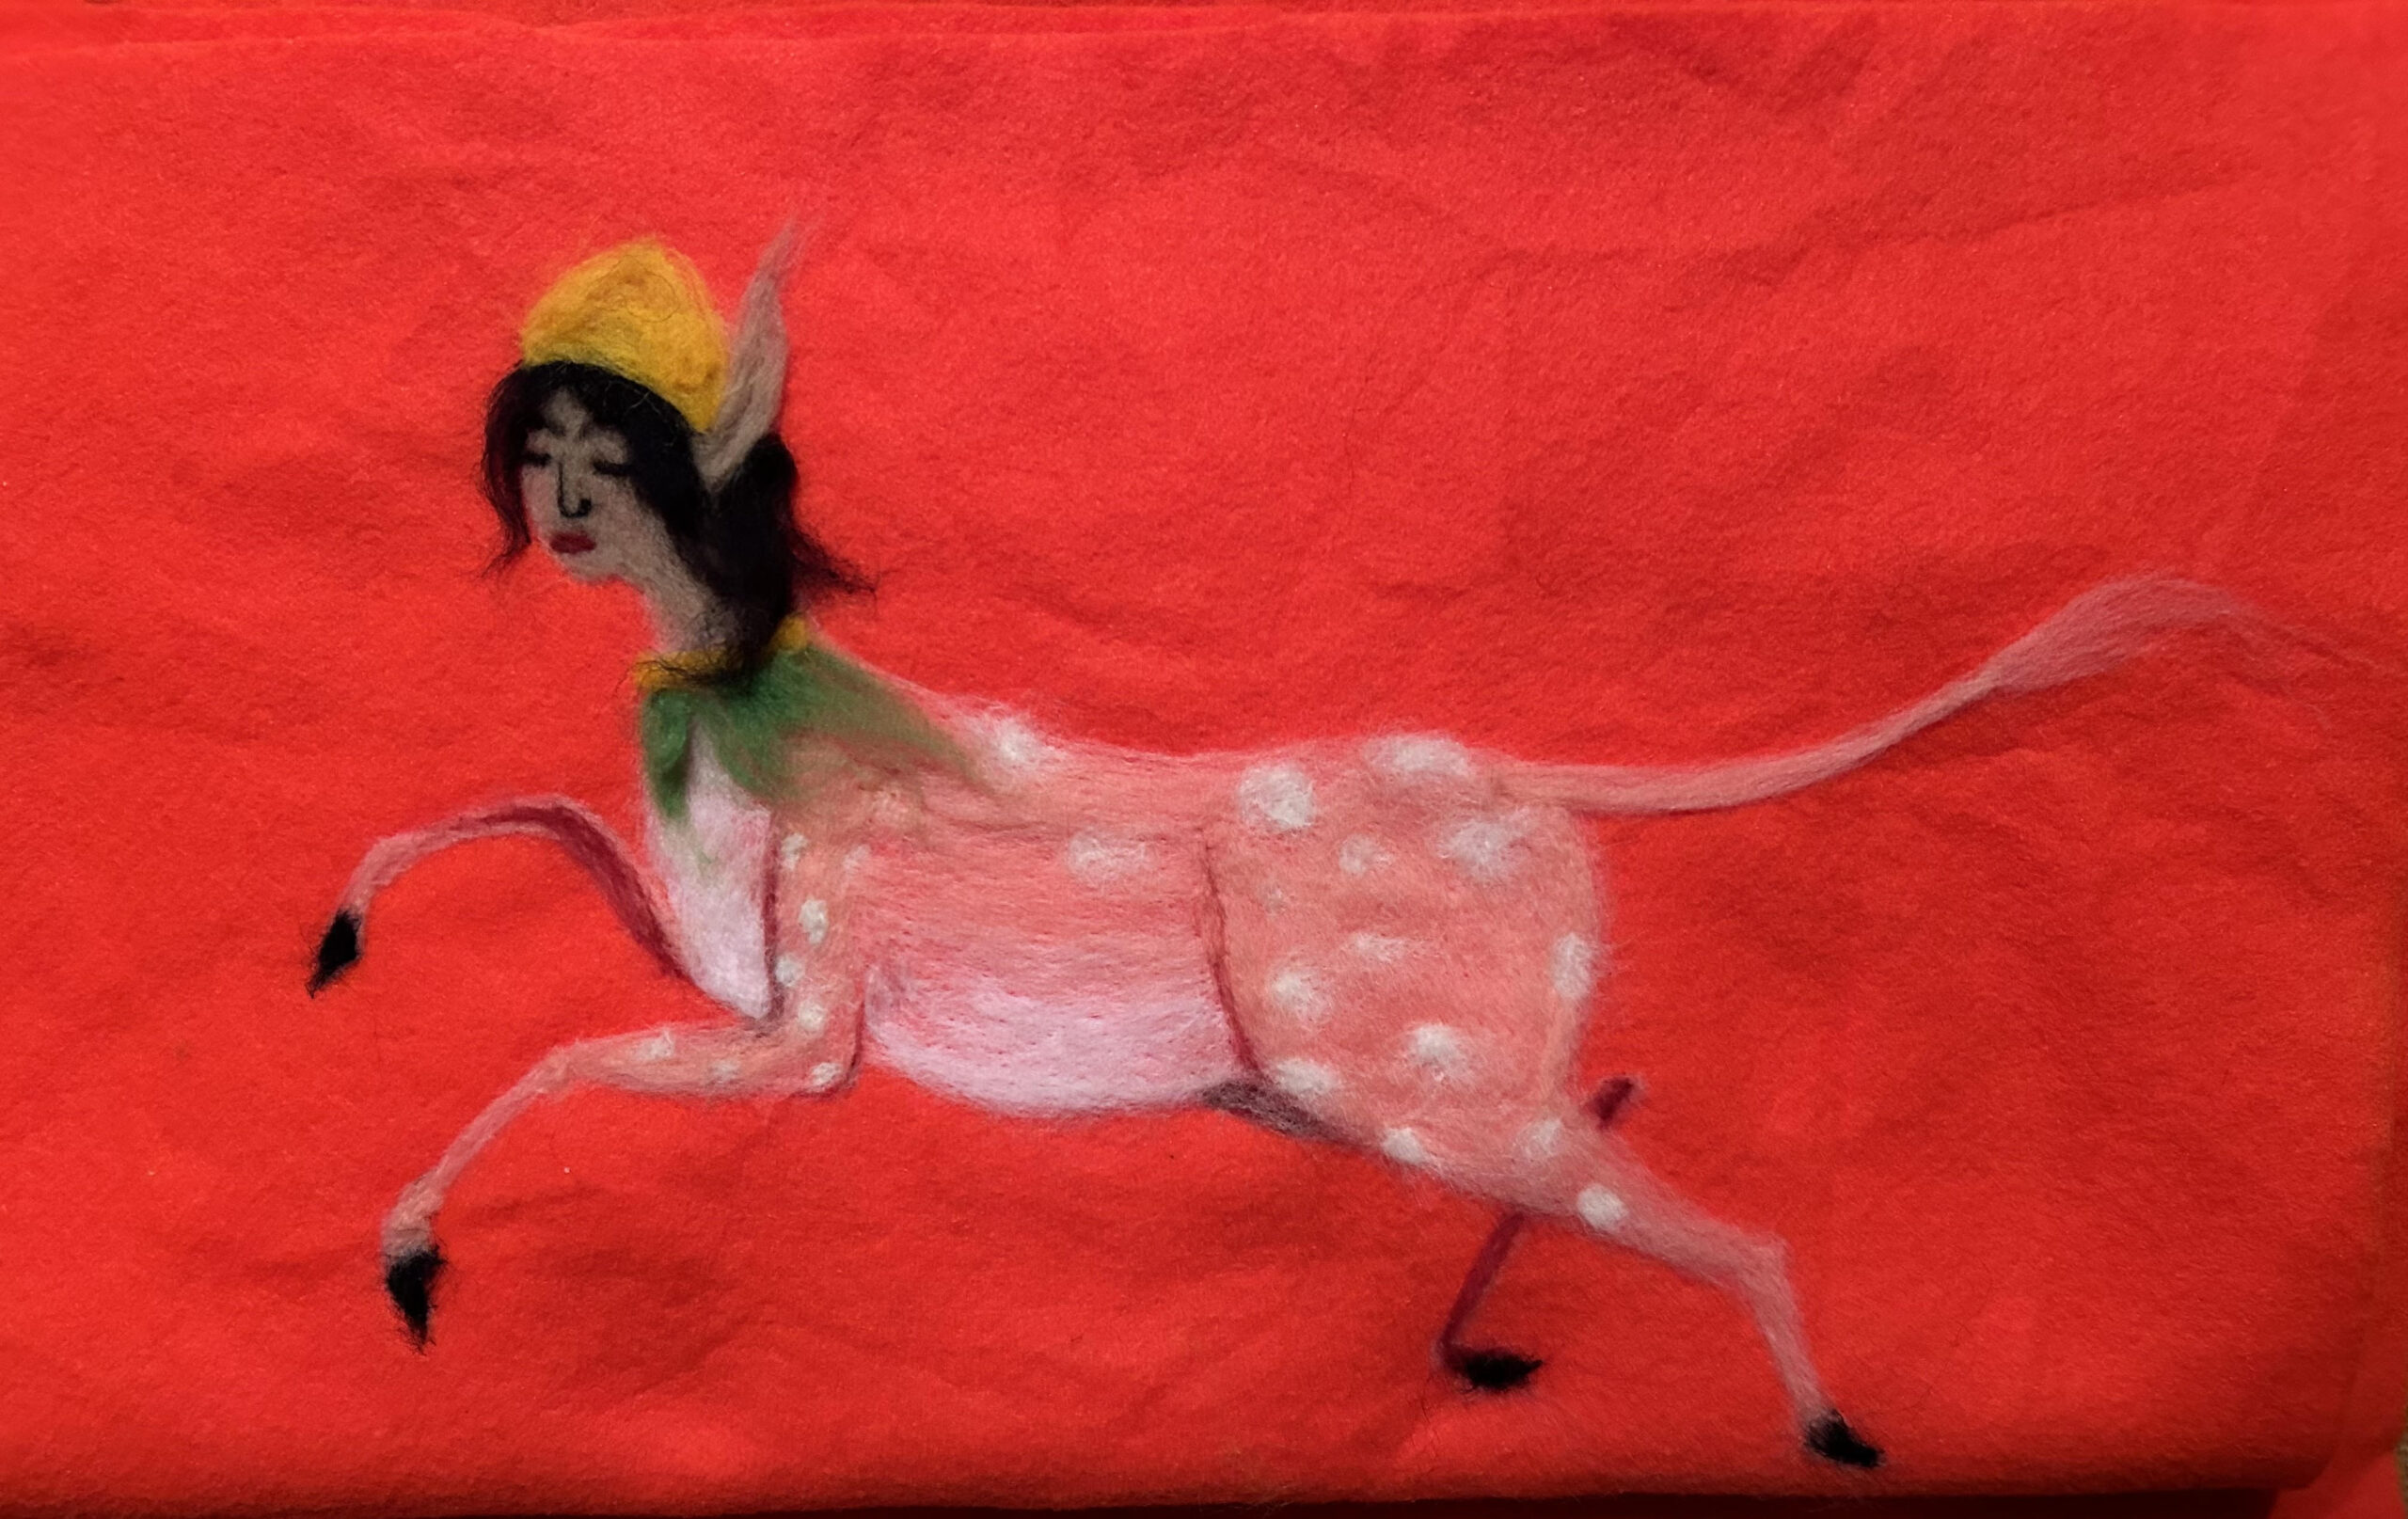 Against a red felt background is a felted figure of a spotted dear-like body with an elf-like head